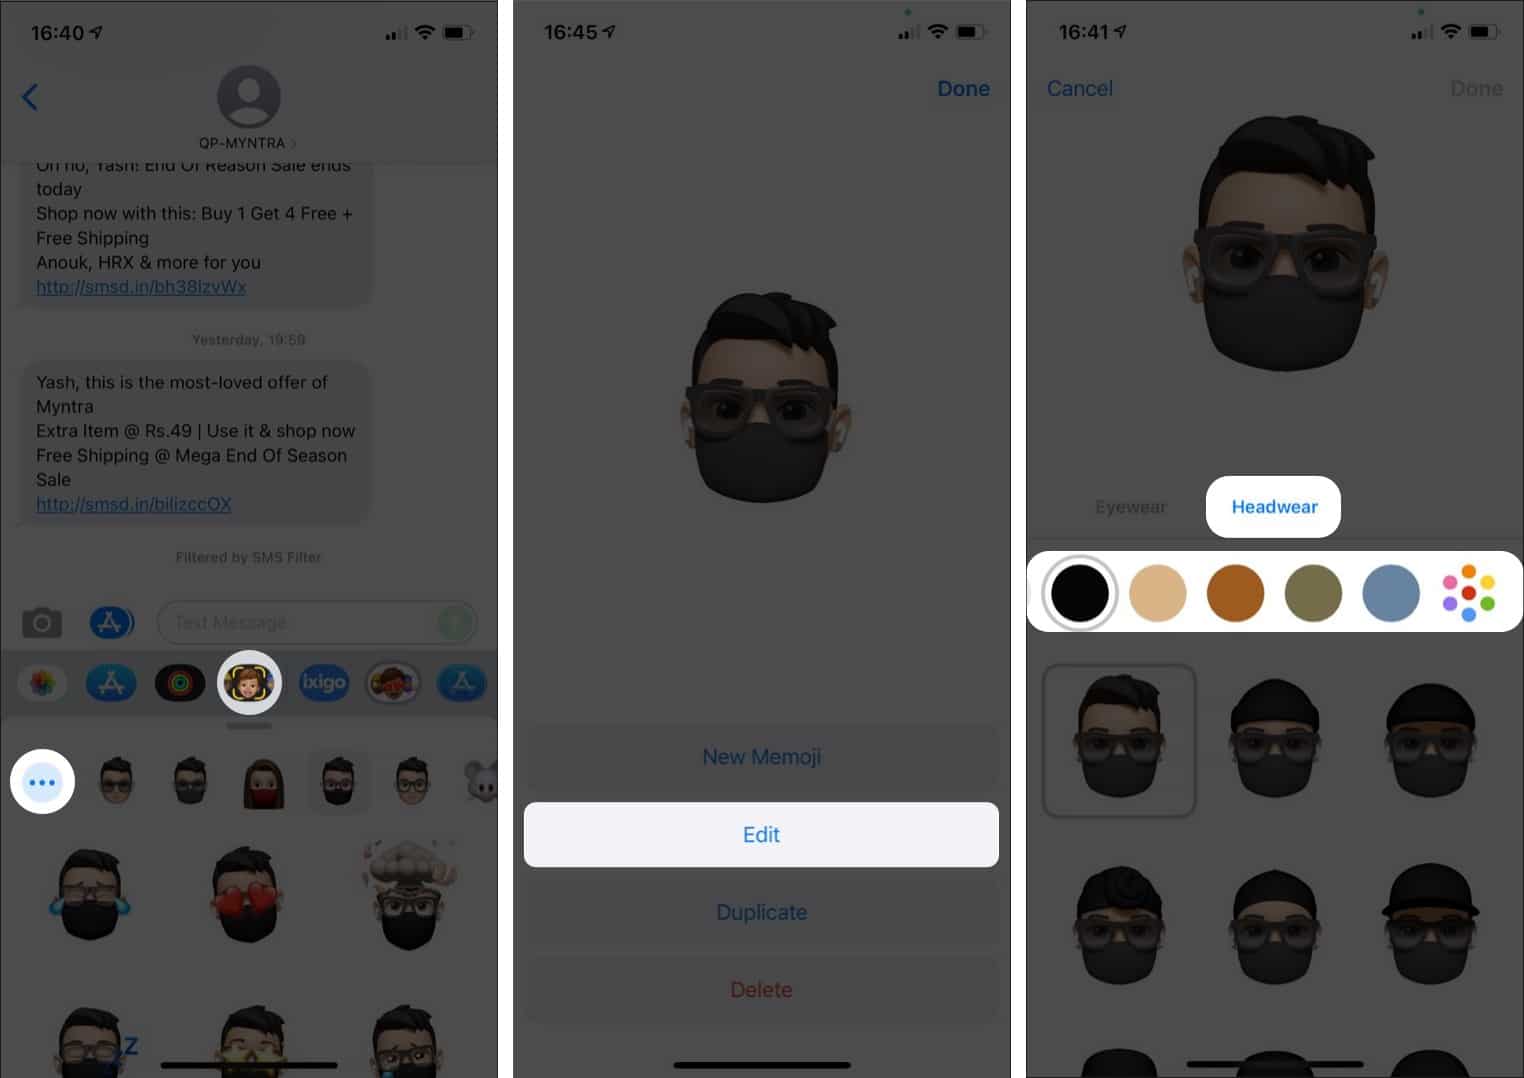 Change your Memoji shirt color on iPhone